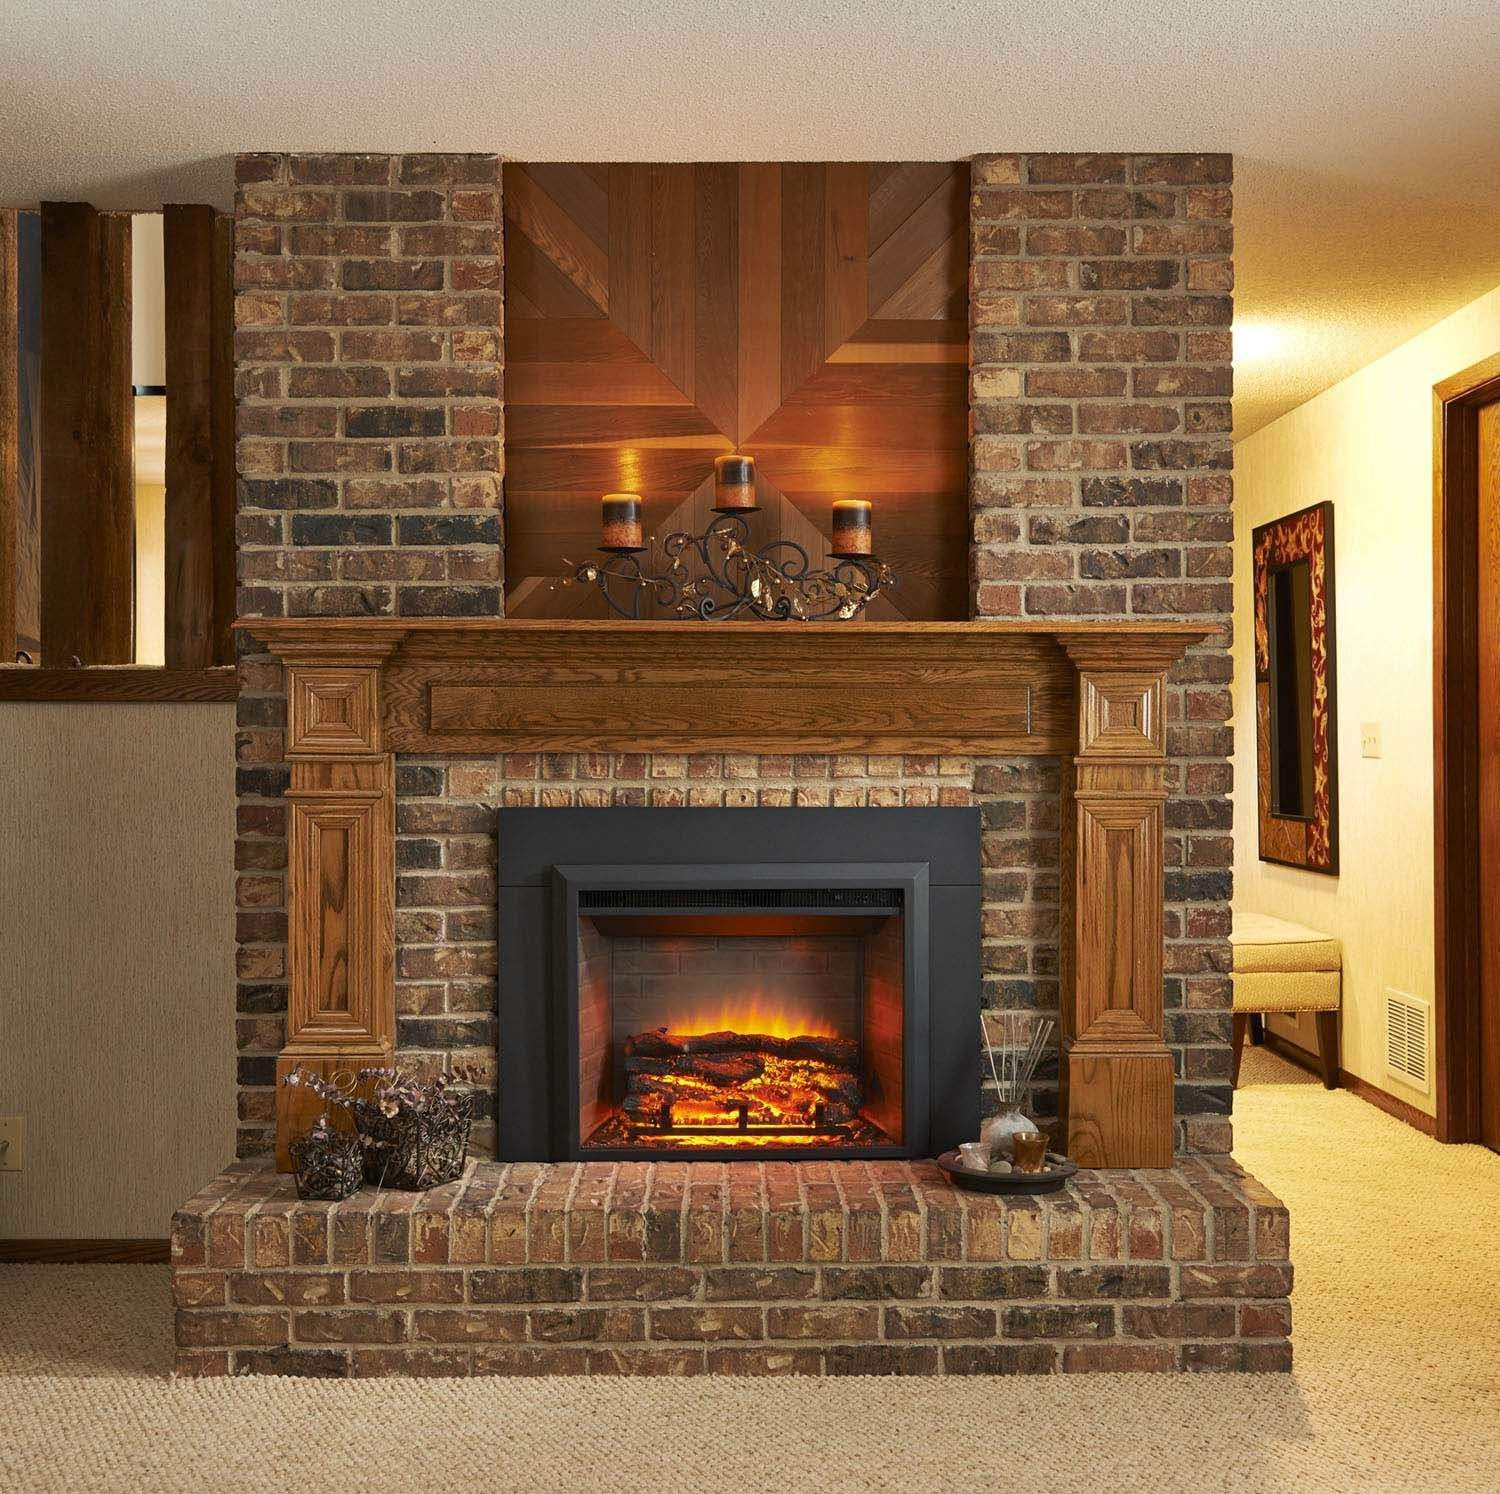 36 Inch Electric Fireplace
 GreatCo Gallery Series Insert Electric Fireplace 36 Inch